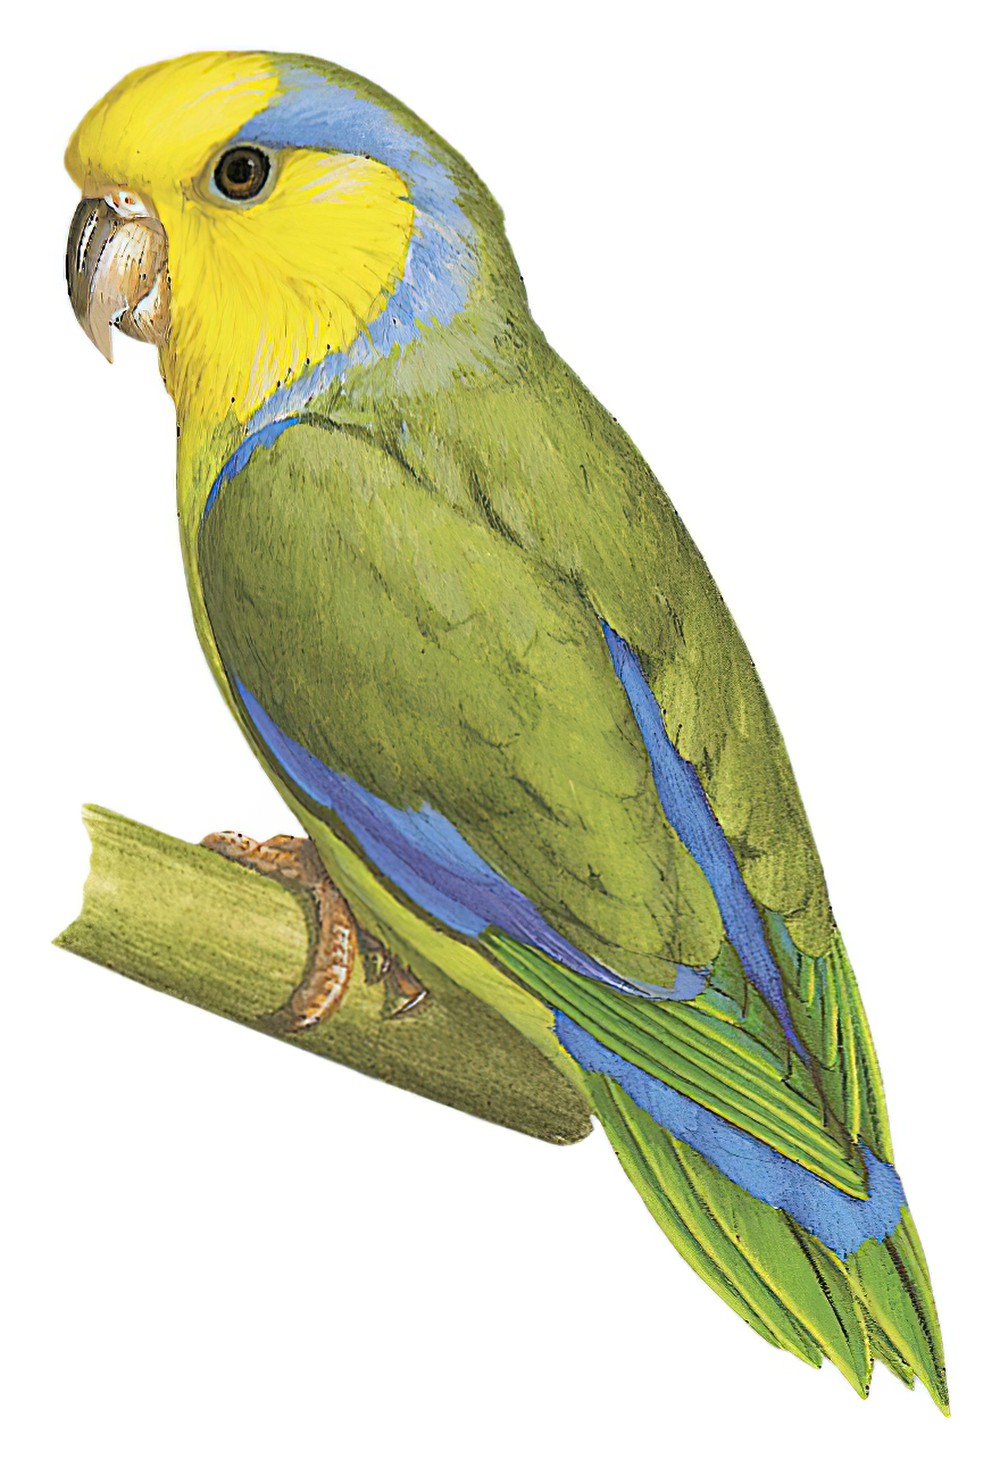 Yellow-faced Parrotlet / Forpus xanthops